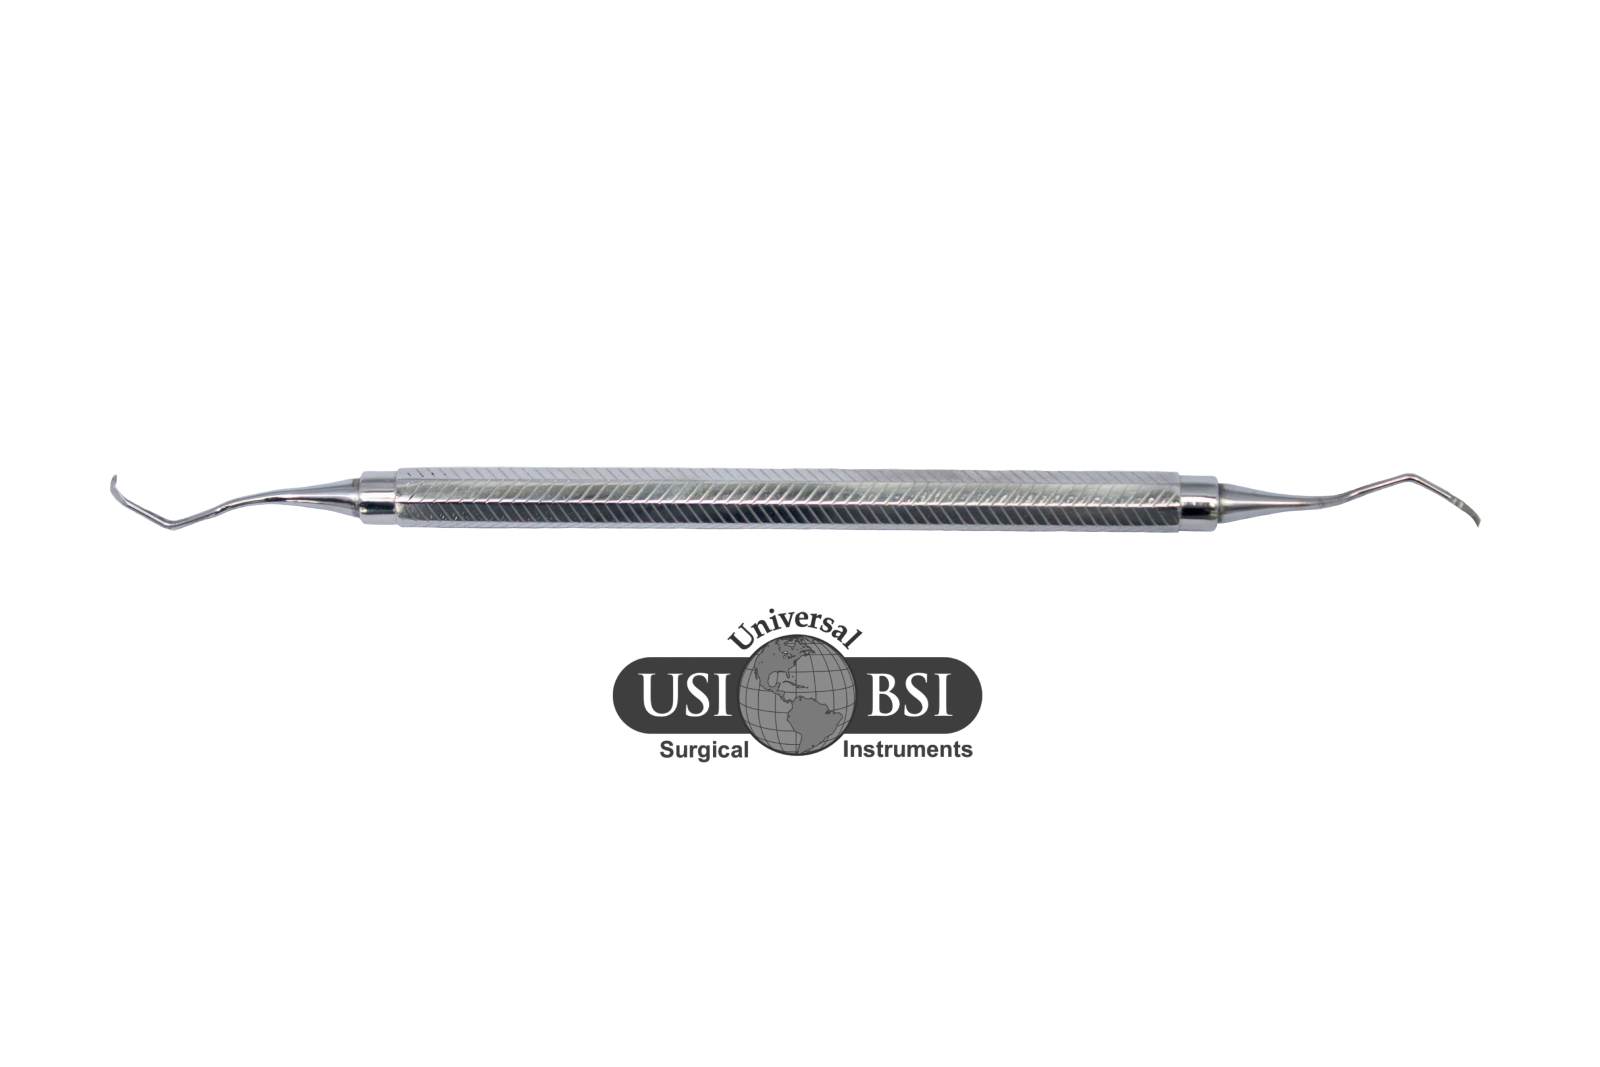 A metal pencil with the usbi and bsi logo.